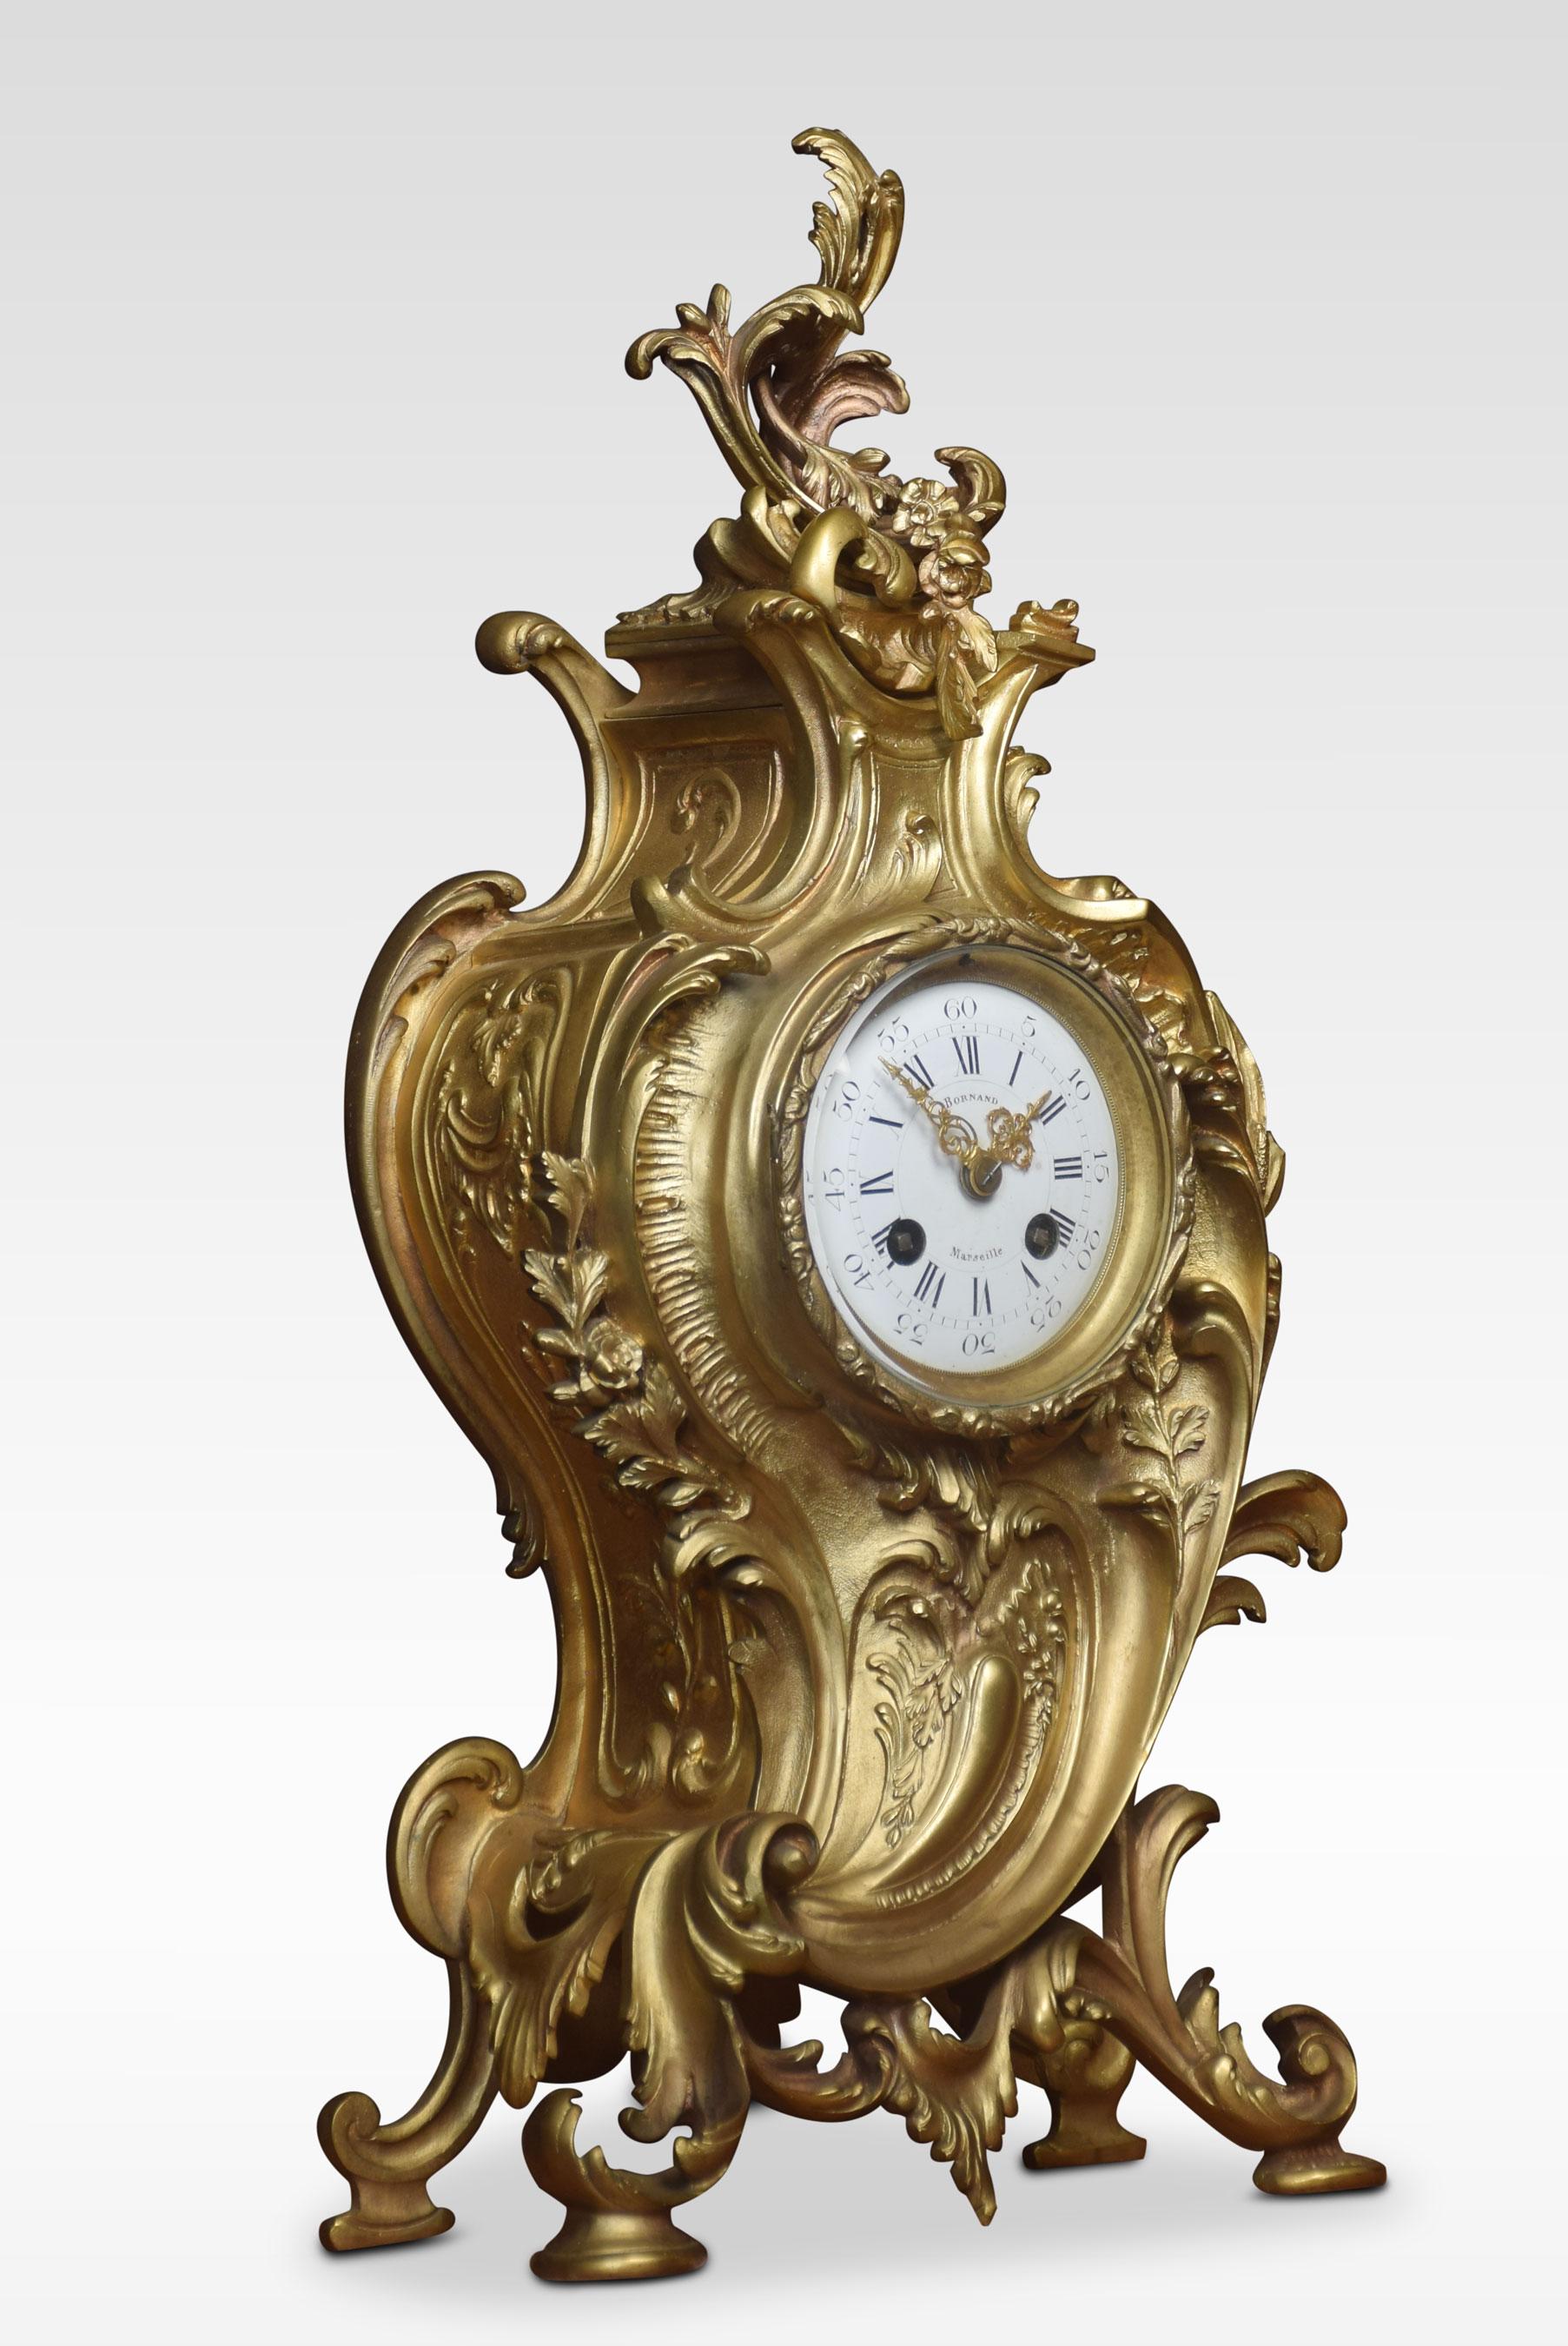 Late 19th century French gilt metal mantel clock, the white enamel dial Roman numerals, signed Bornand Marseilles. enclosing a two-train movement striking on a bell. Enclosed in cast foliate swept case.
Dimensions:
Height 19 inches
Width 9